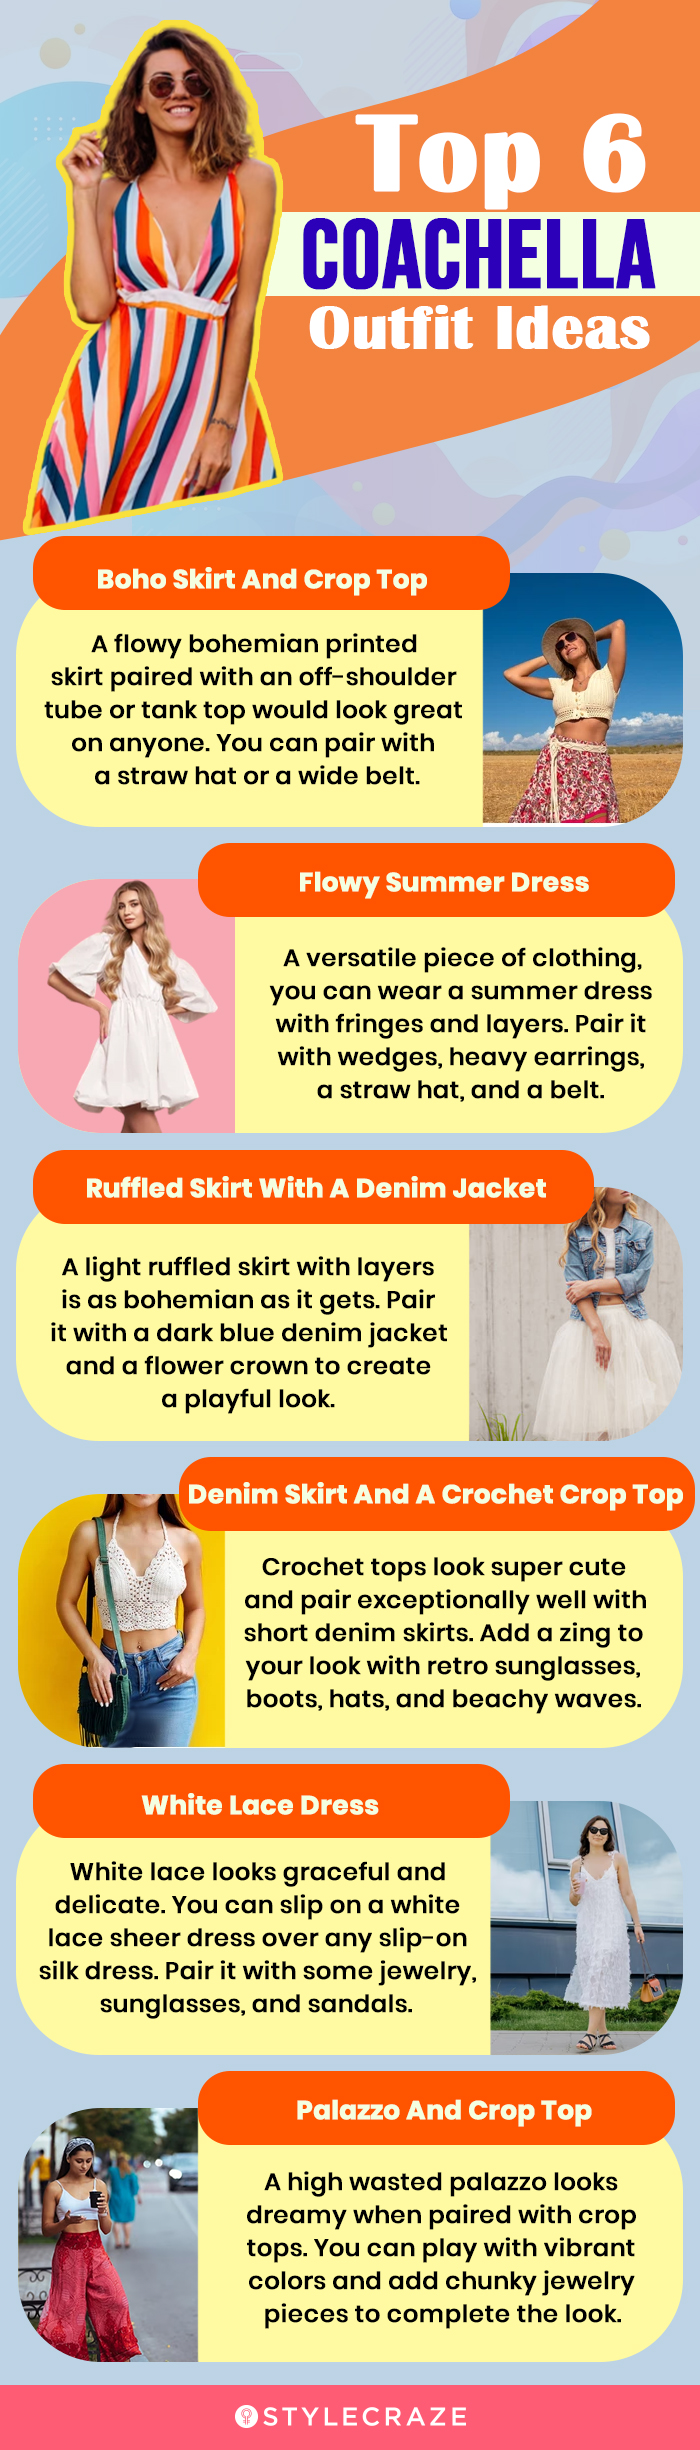 top 6 coachella outfit ideas (infographic)